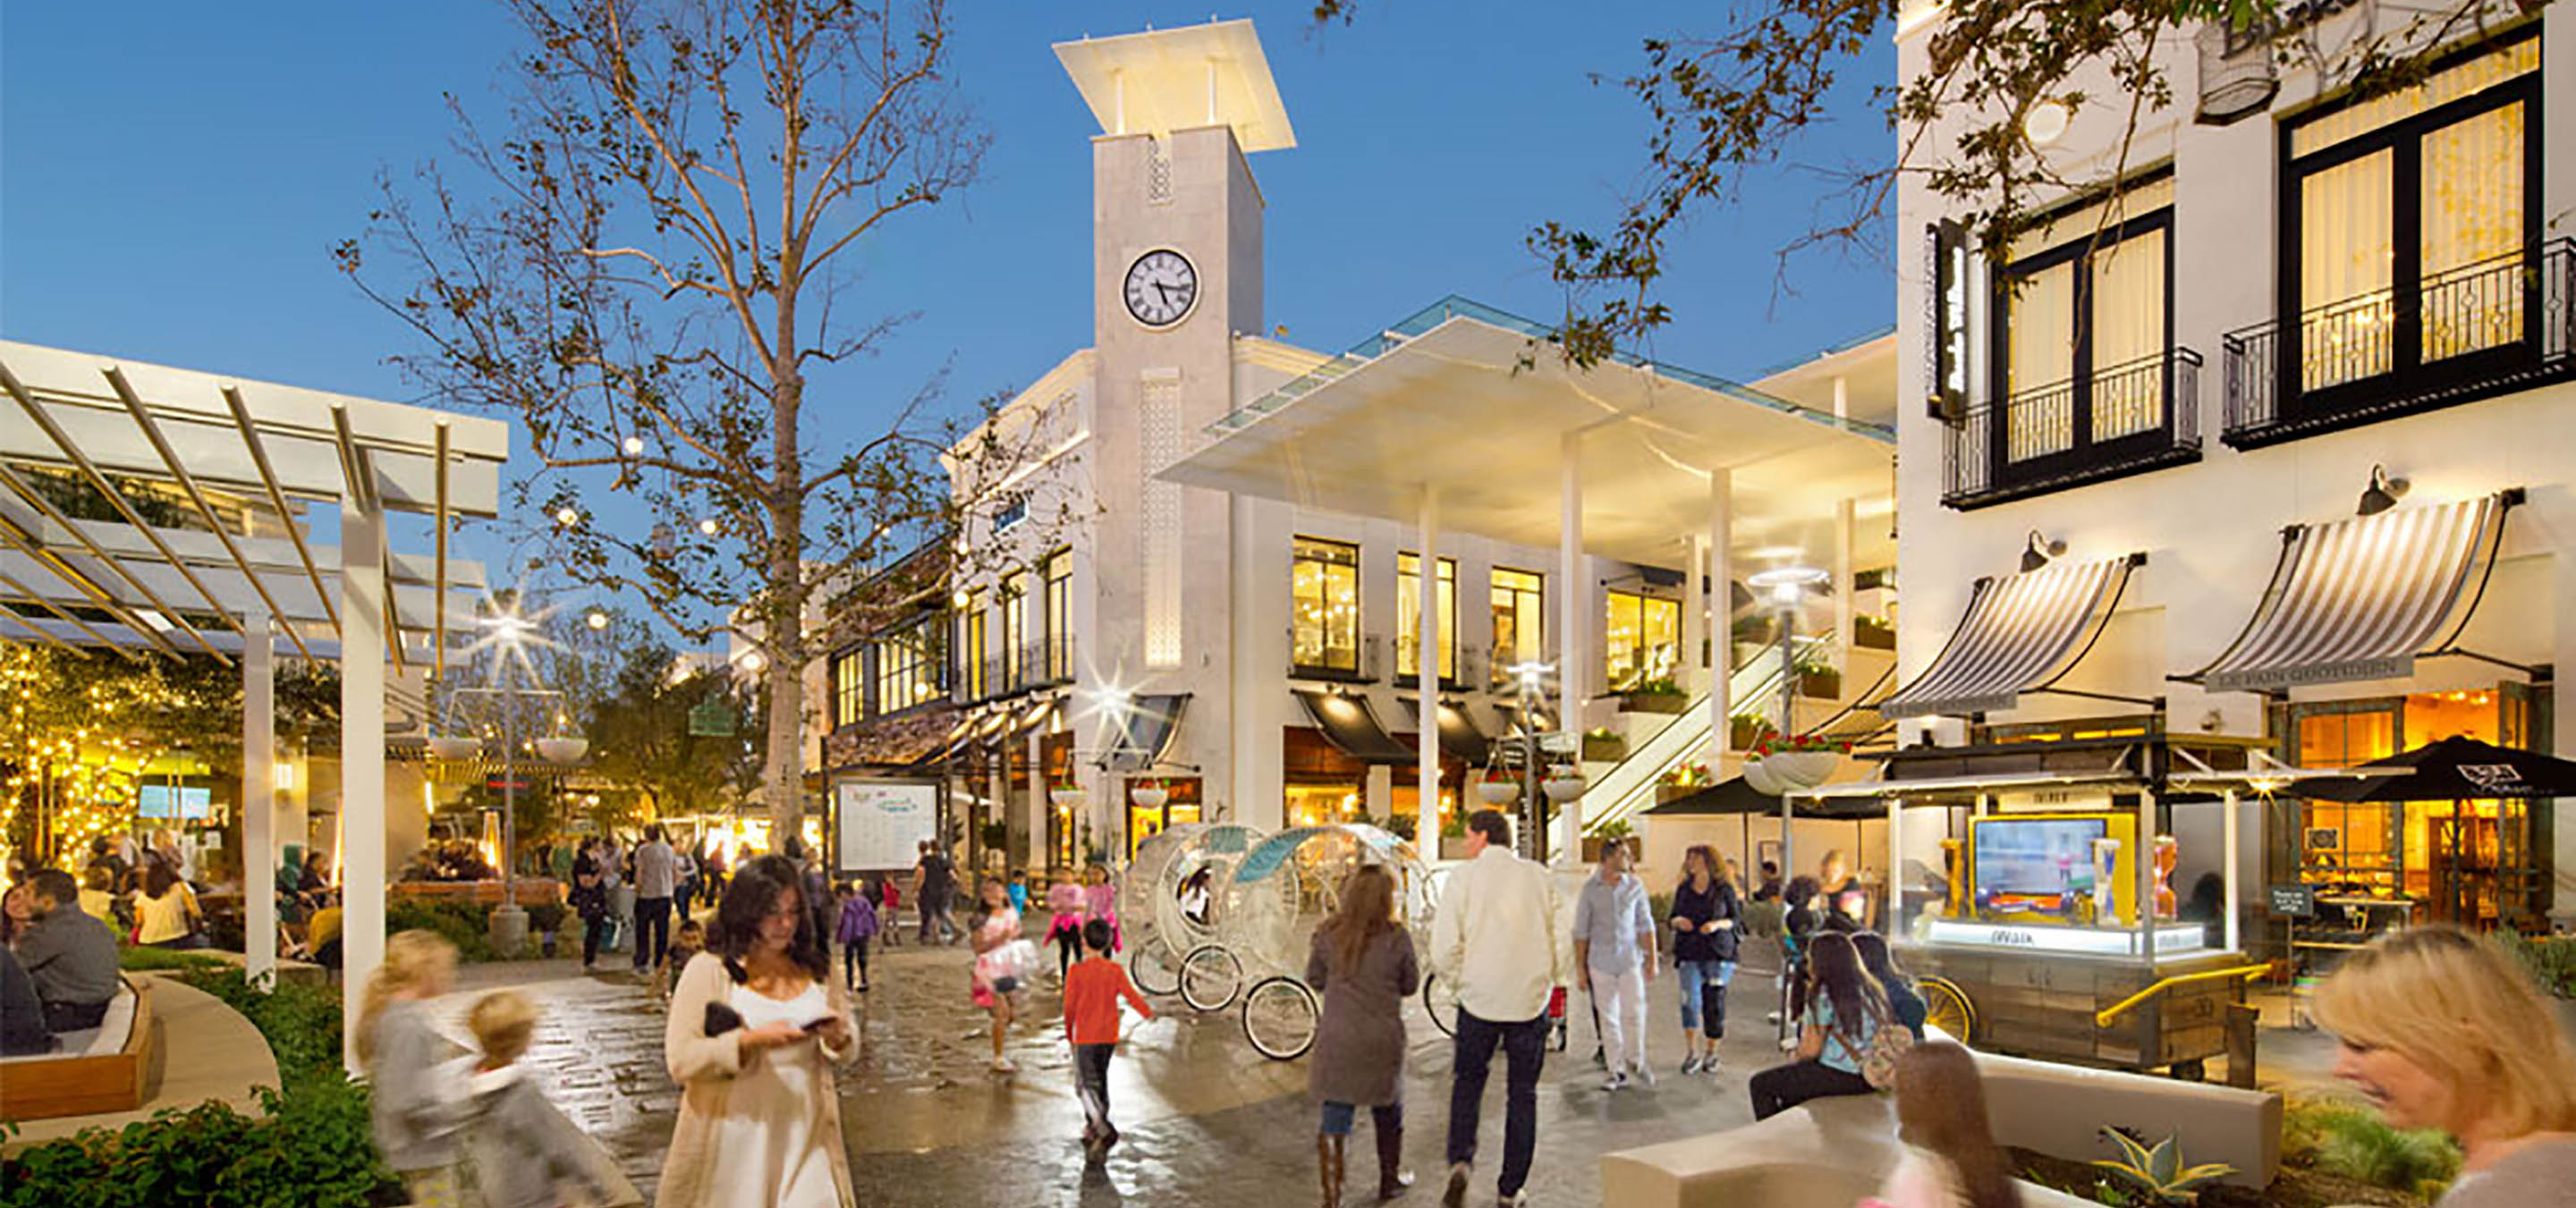 The Village in Woodland Hills - More than a Mall, It's a Destination!